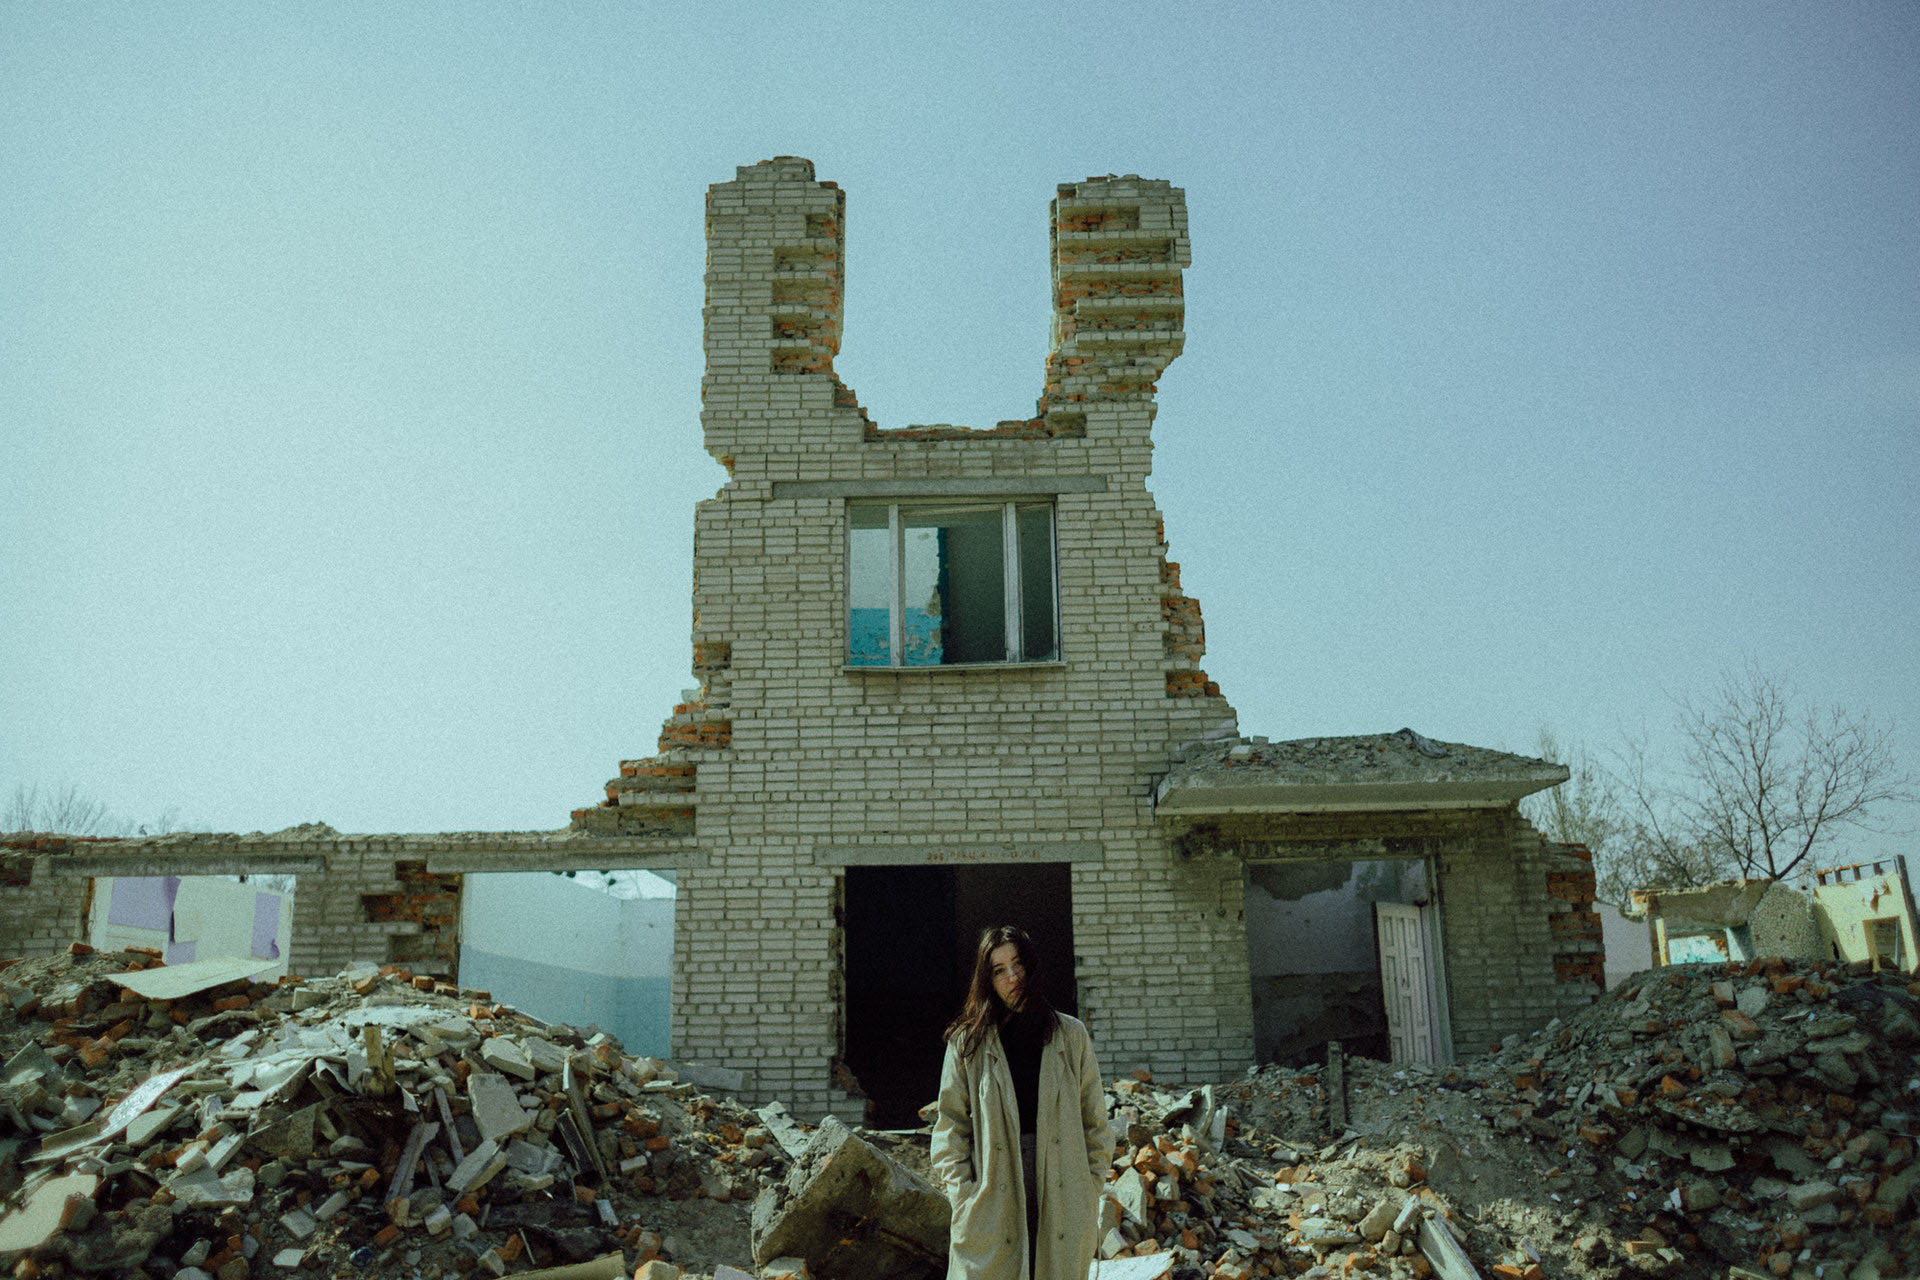 A woman in a brown cardigan is standing in front of a destroyed brick building.